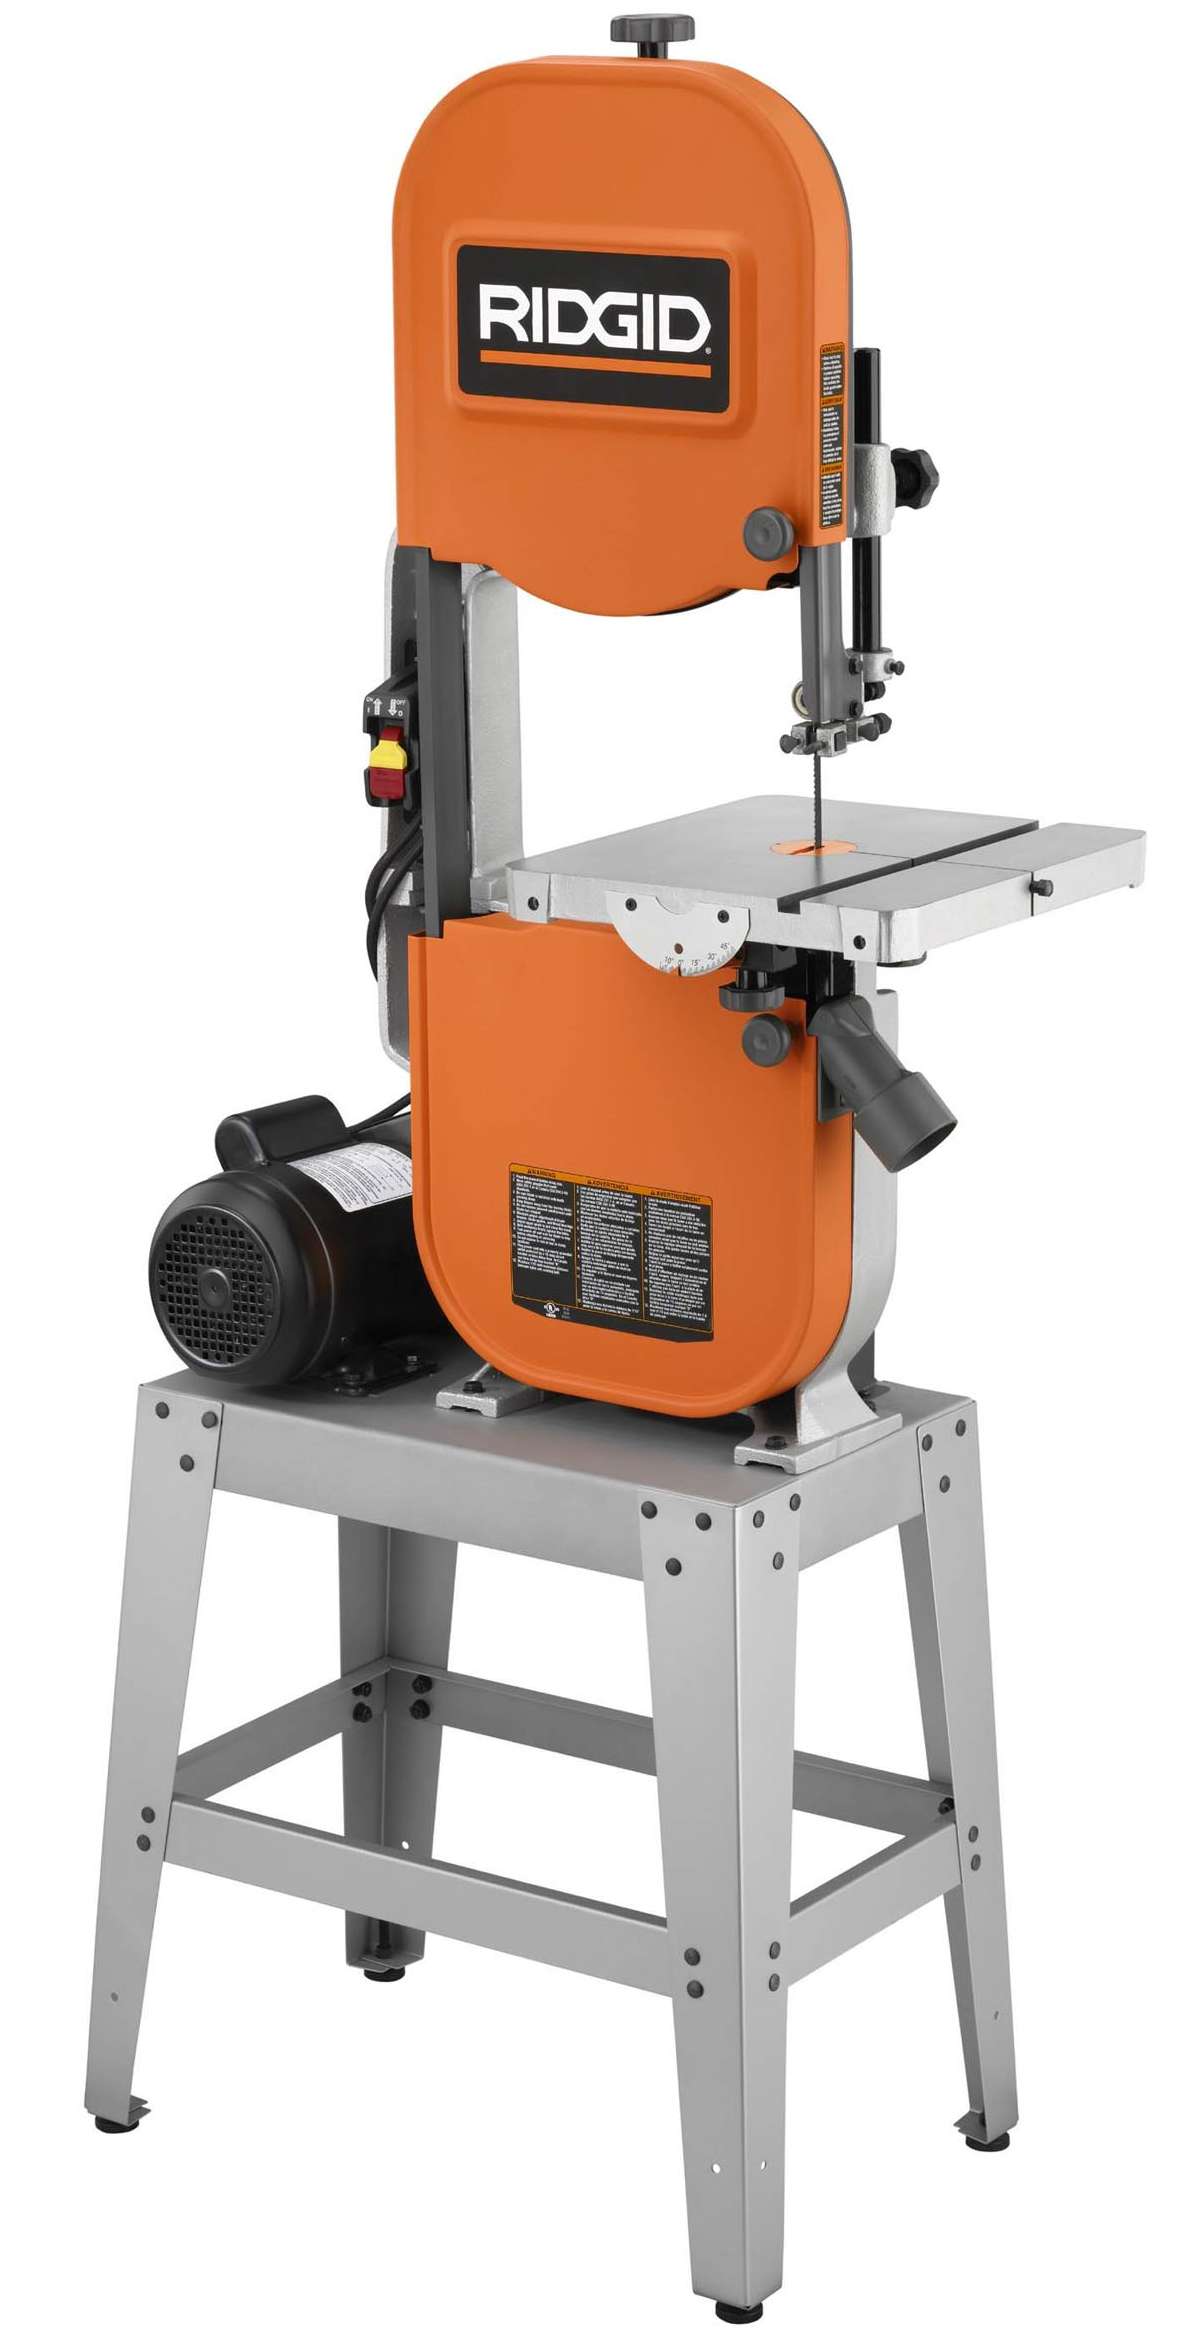 Ridgid 14 Band Saw has Ability to Cut Stock up to Six